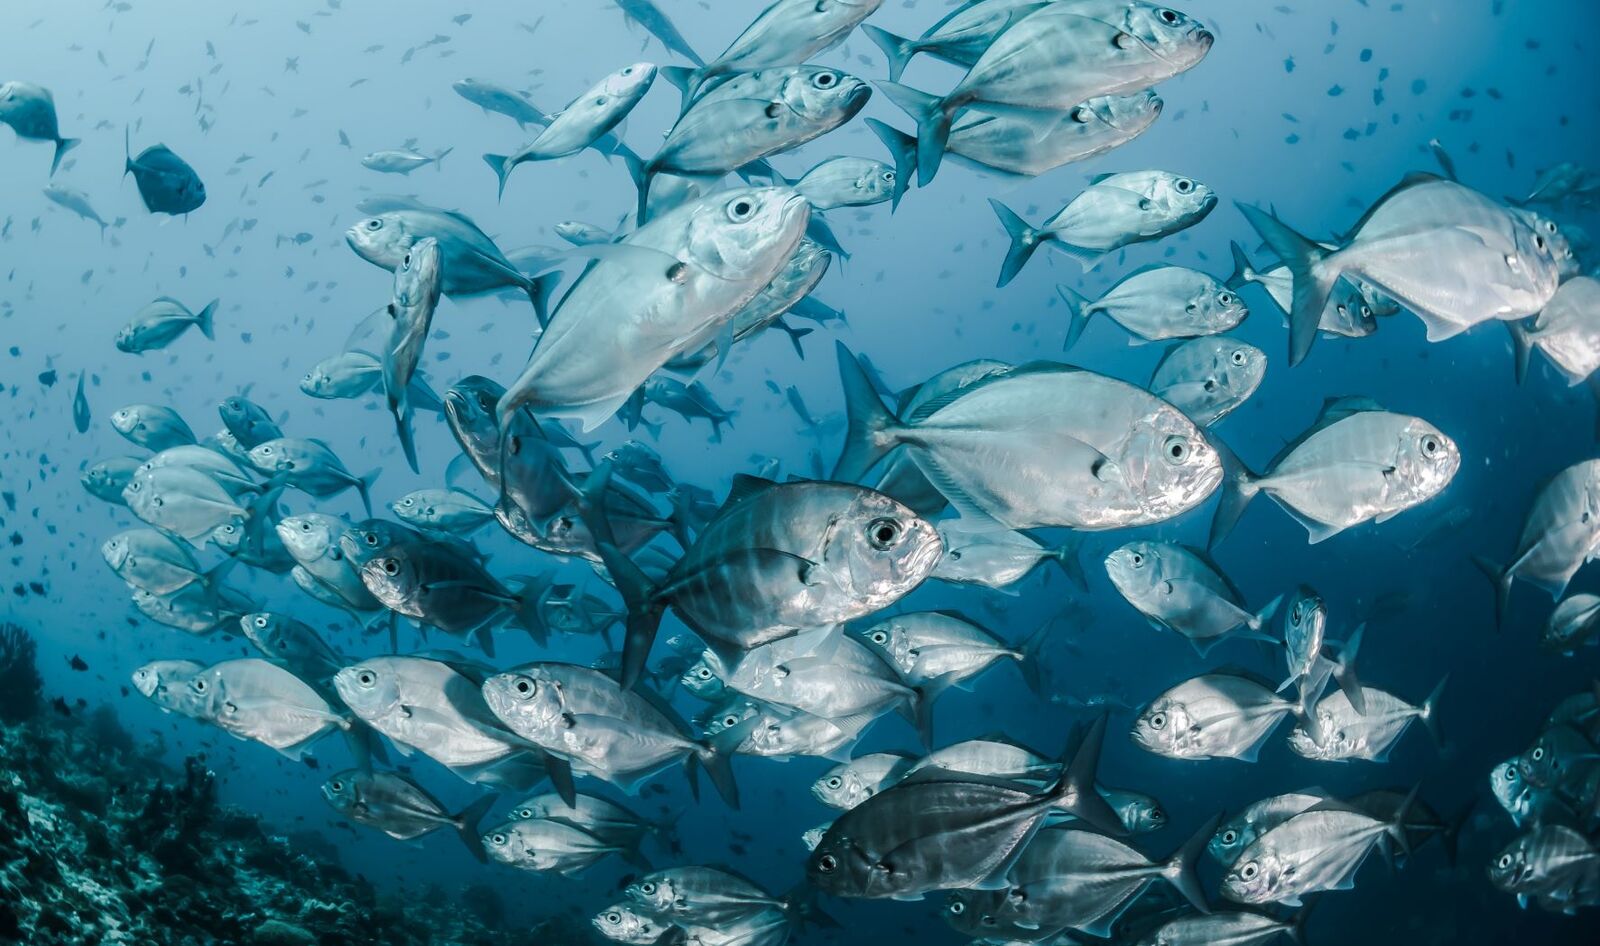 Ocean Pollution's Impact on Fish Now Linked to Skin Cancer, New Study Finds